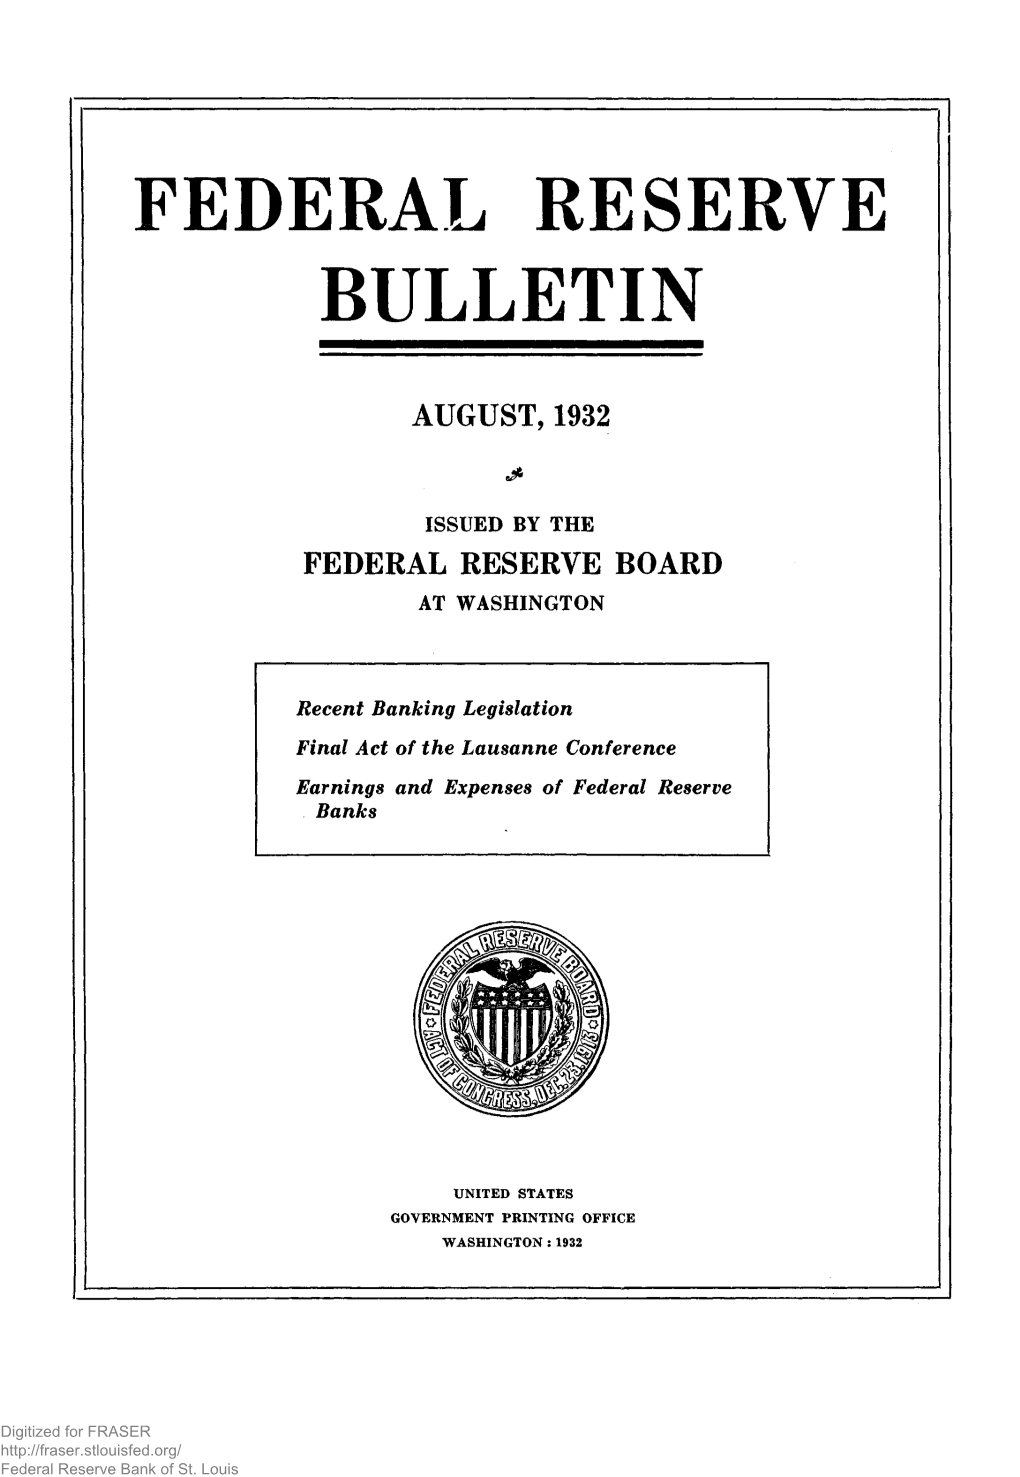 Federal Reserve Bulletin August 1932